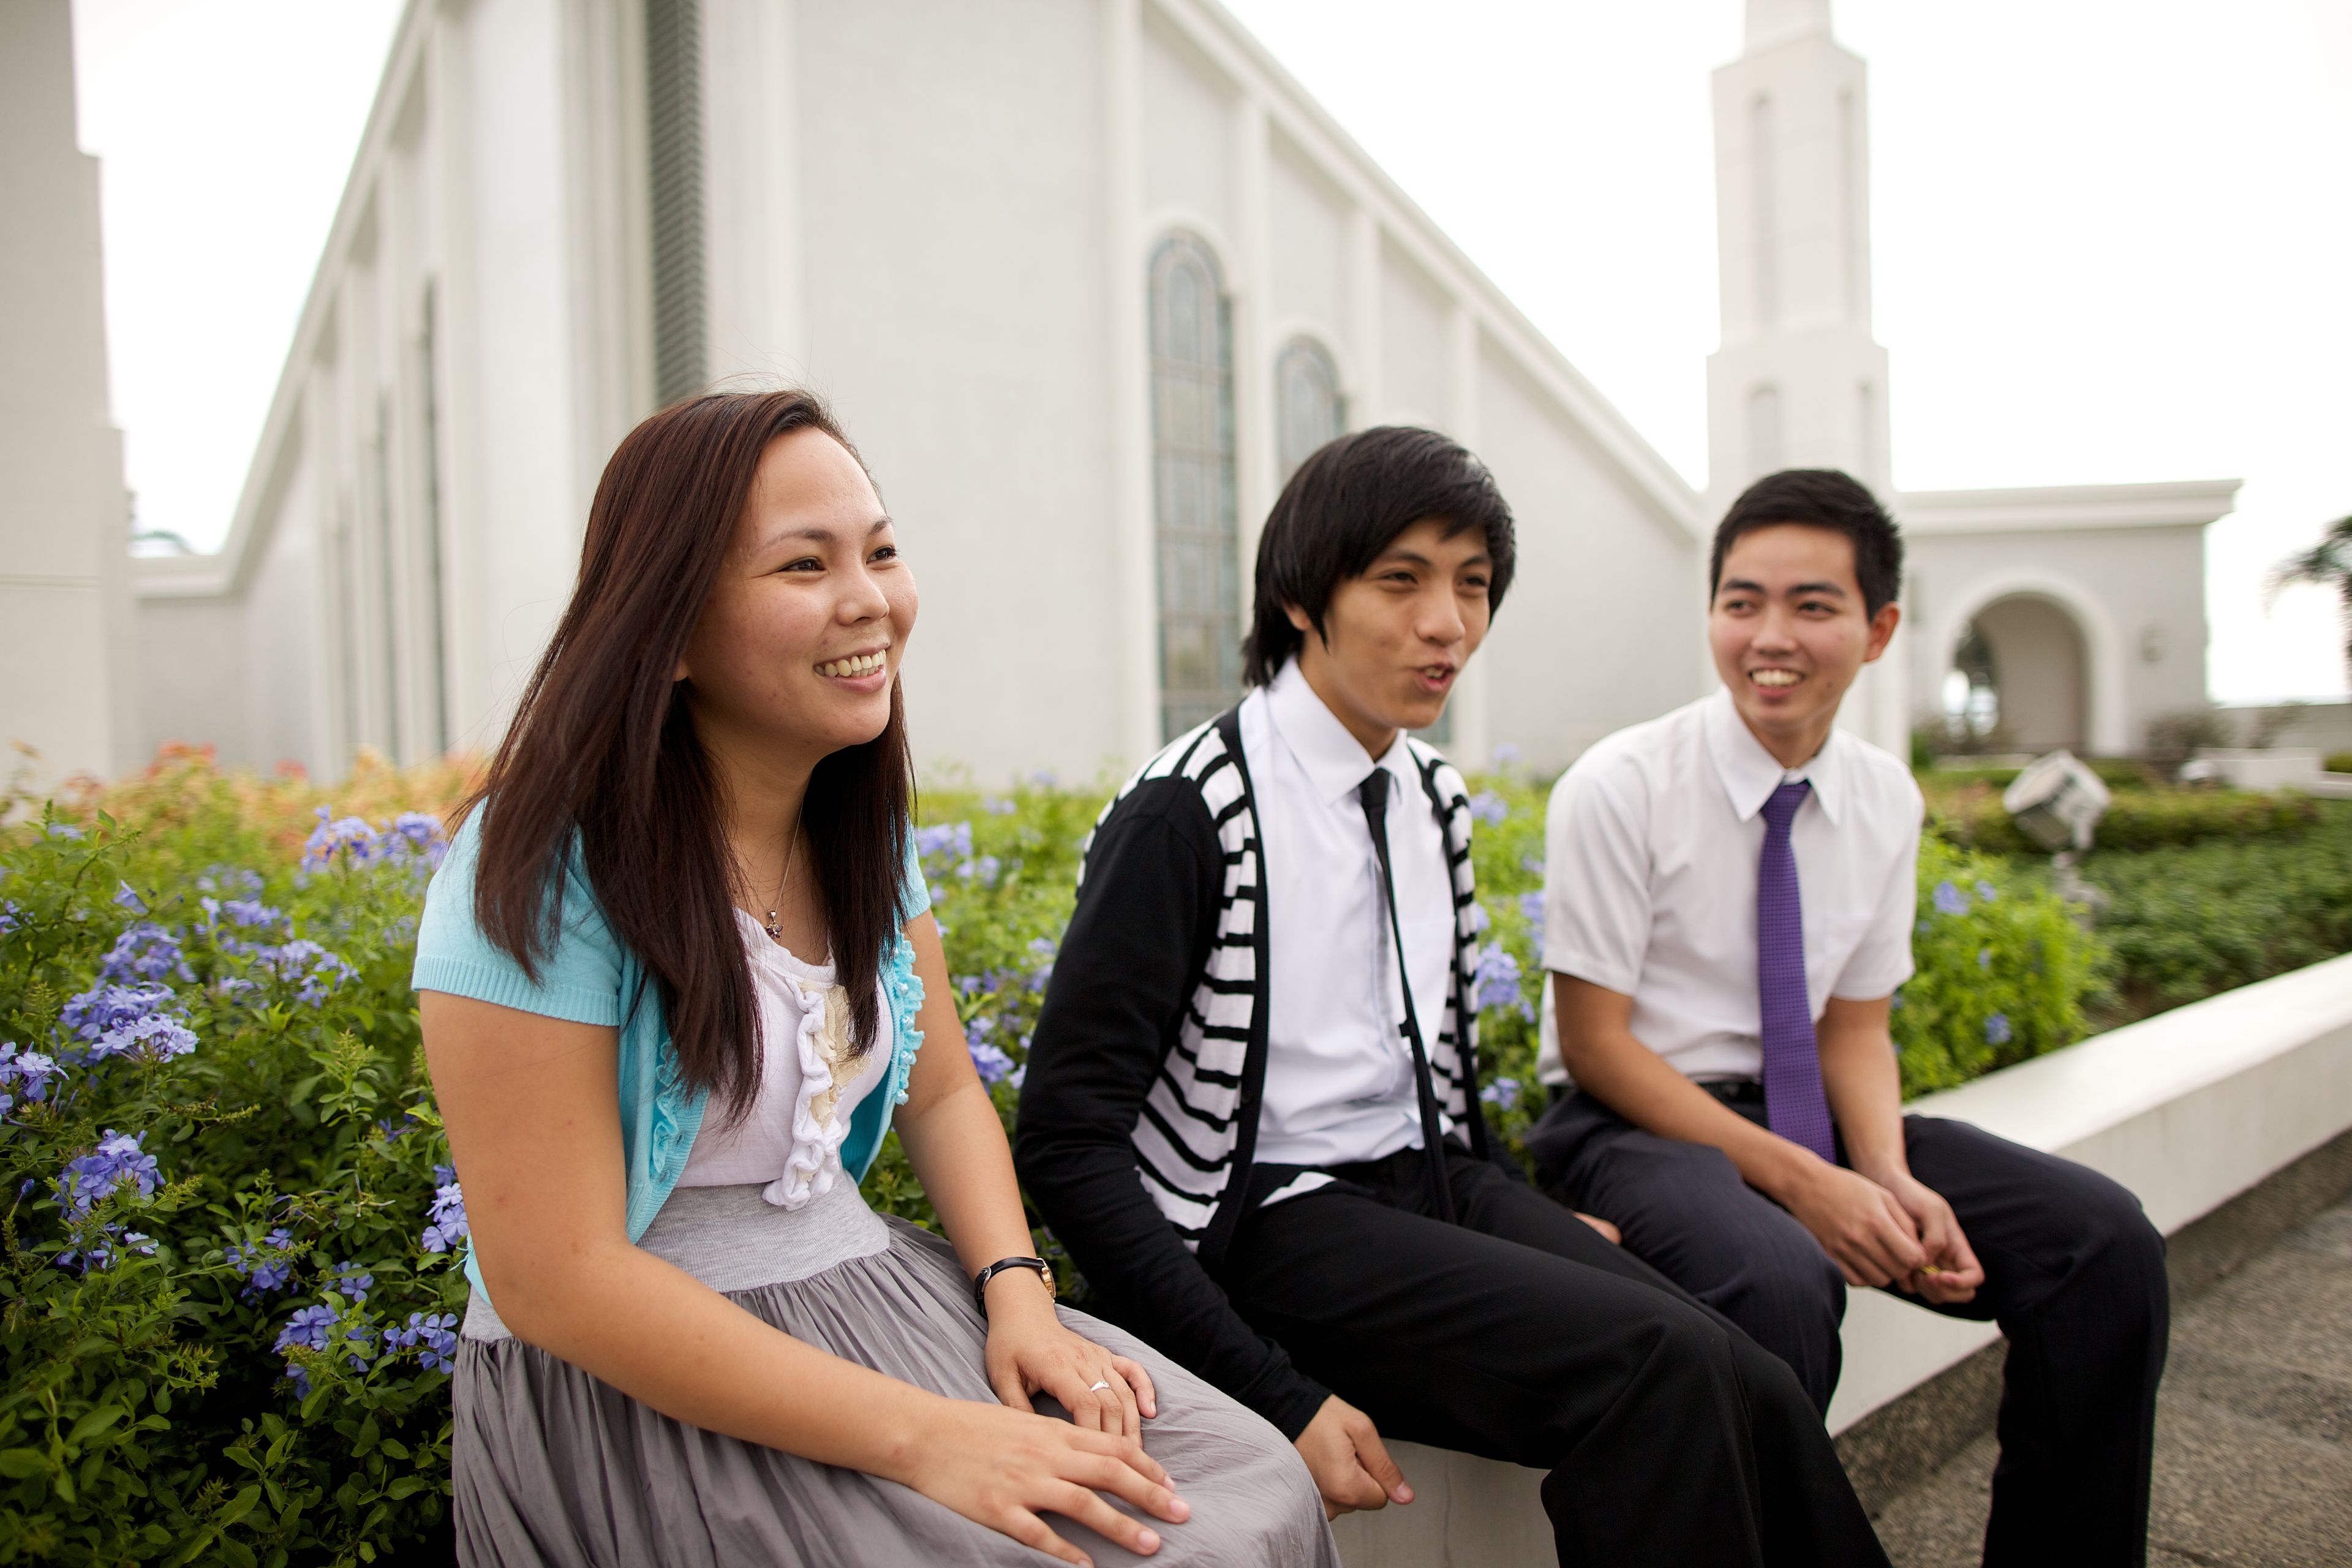 Filipino young men and young women visit the Manila temple with their leaders.